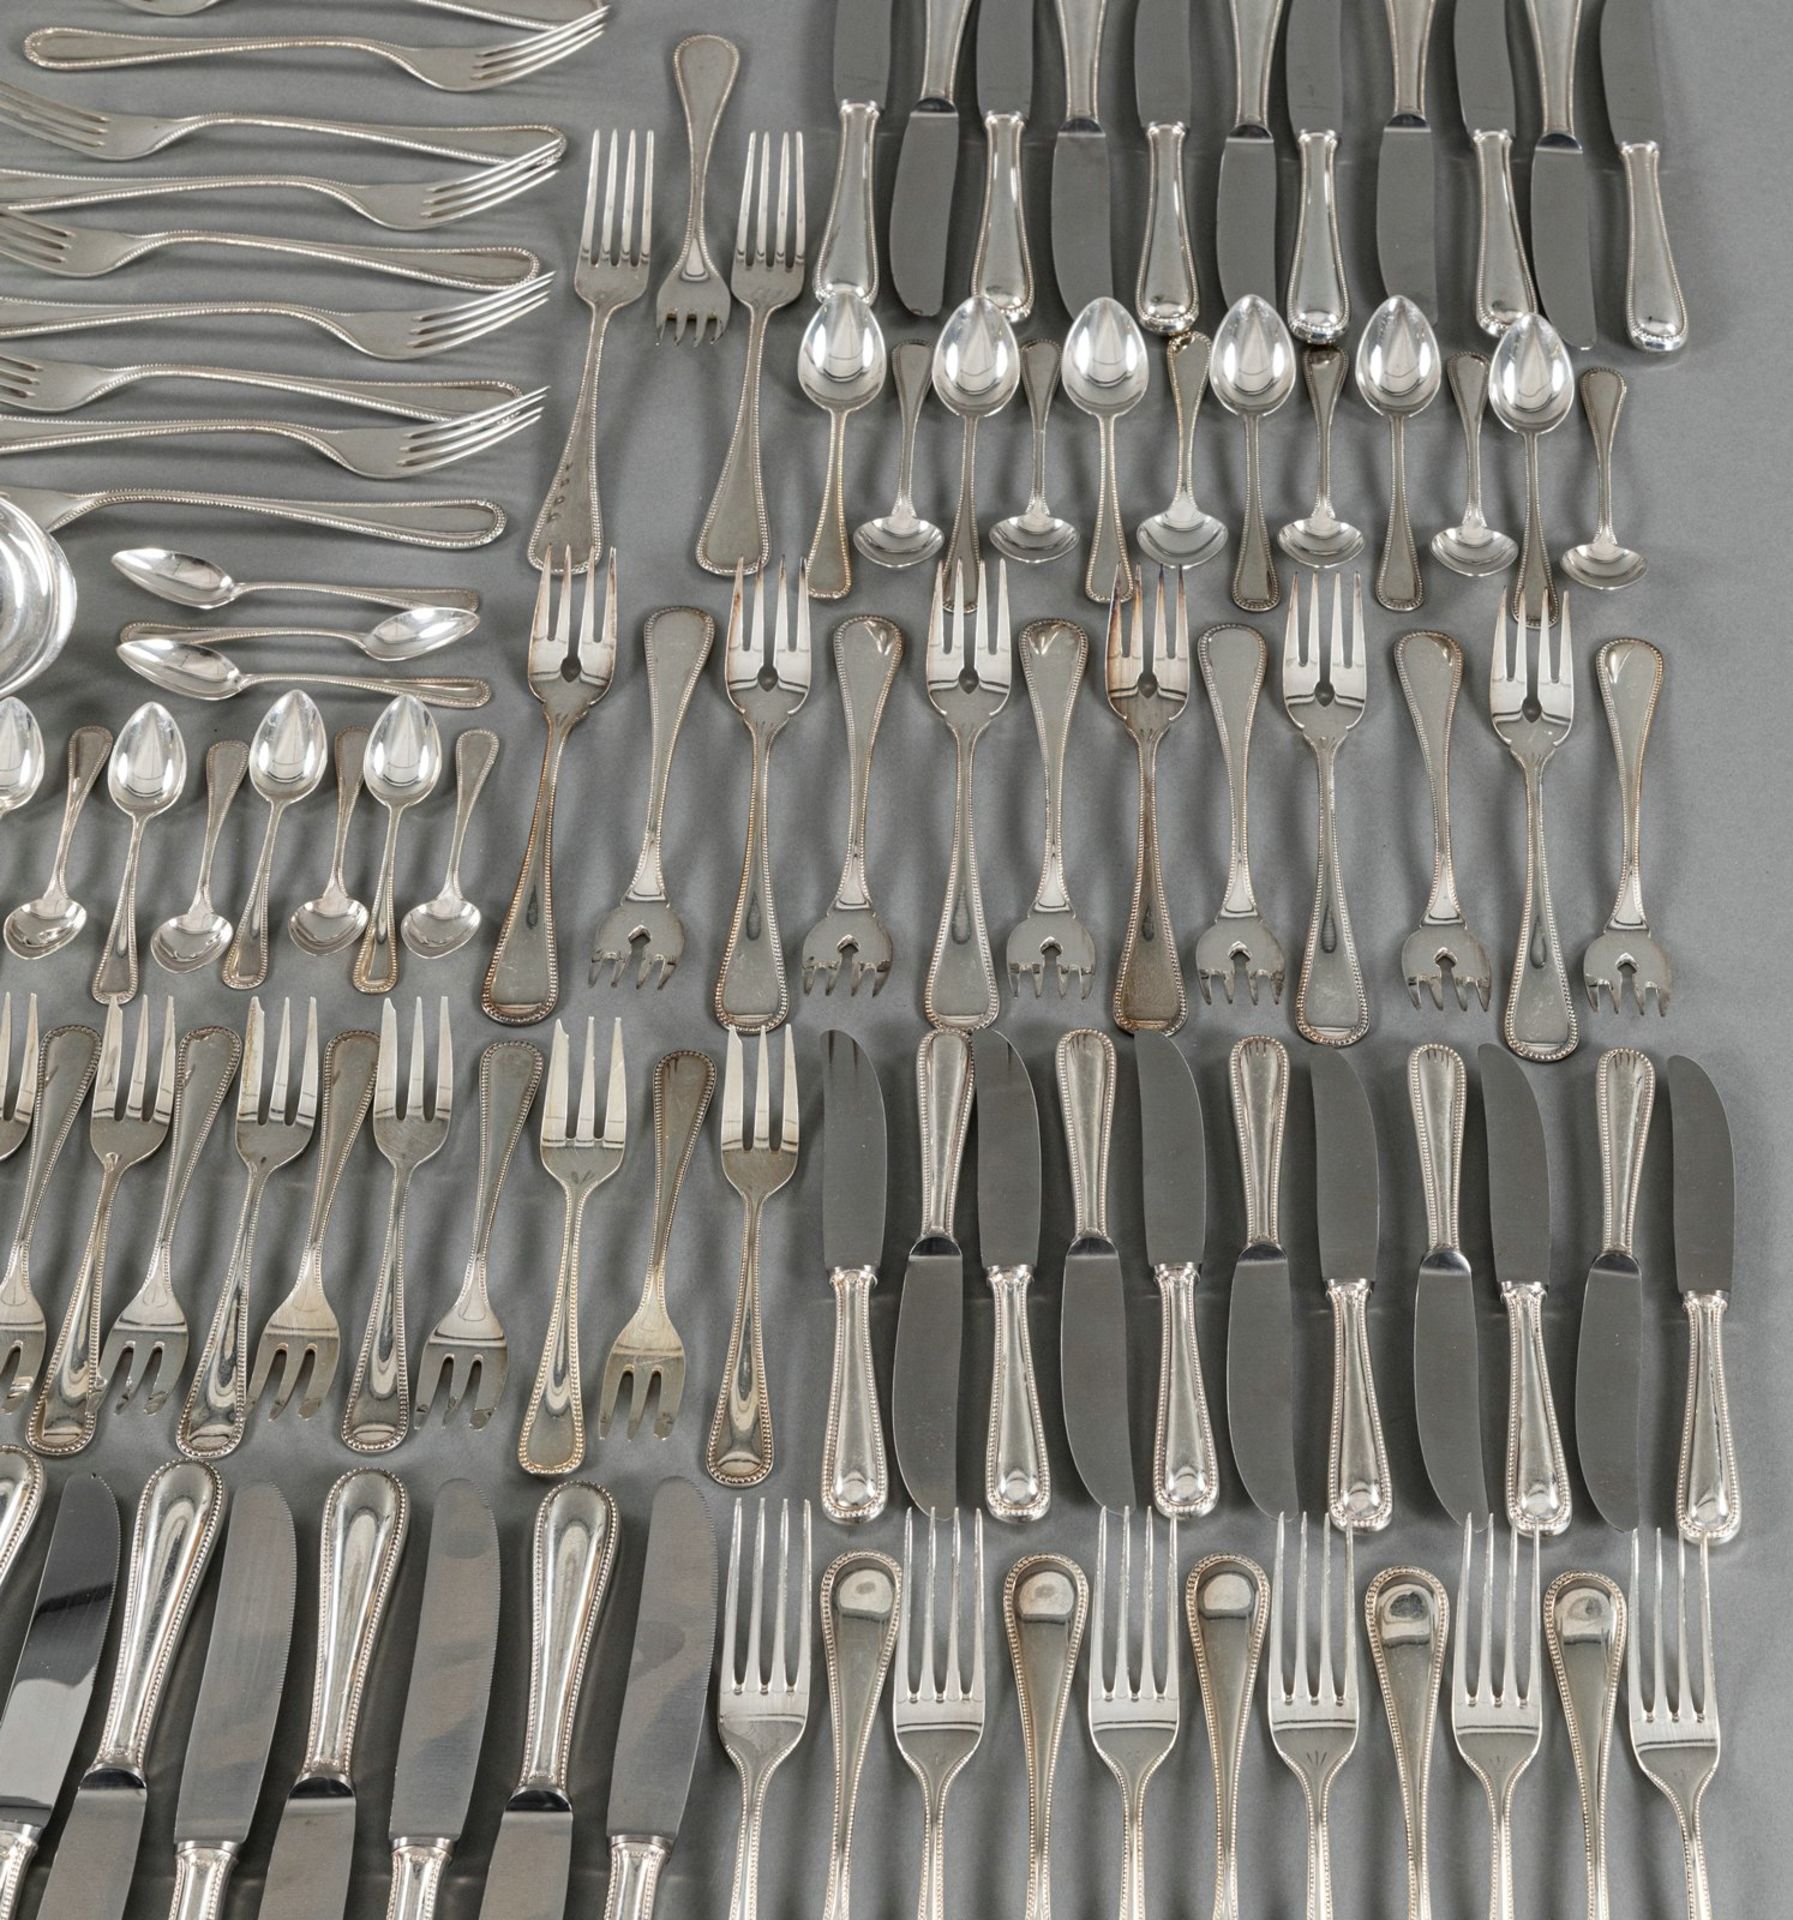 A SILVER CUTLERY FOR MOSTLY 11-12 PEOPLE - Image 5 of 12